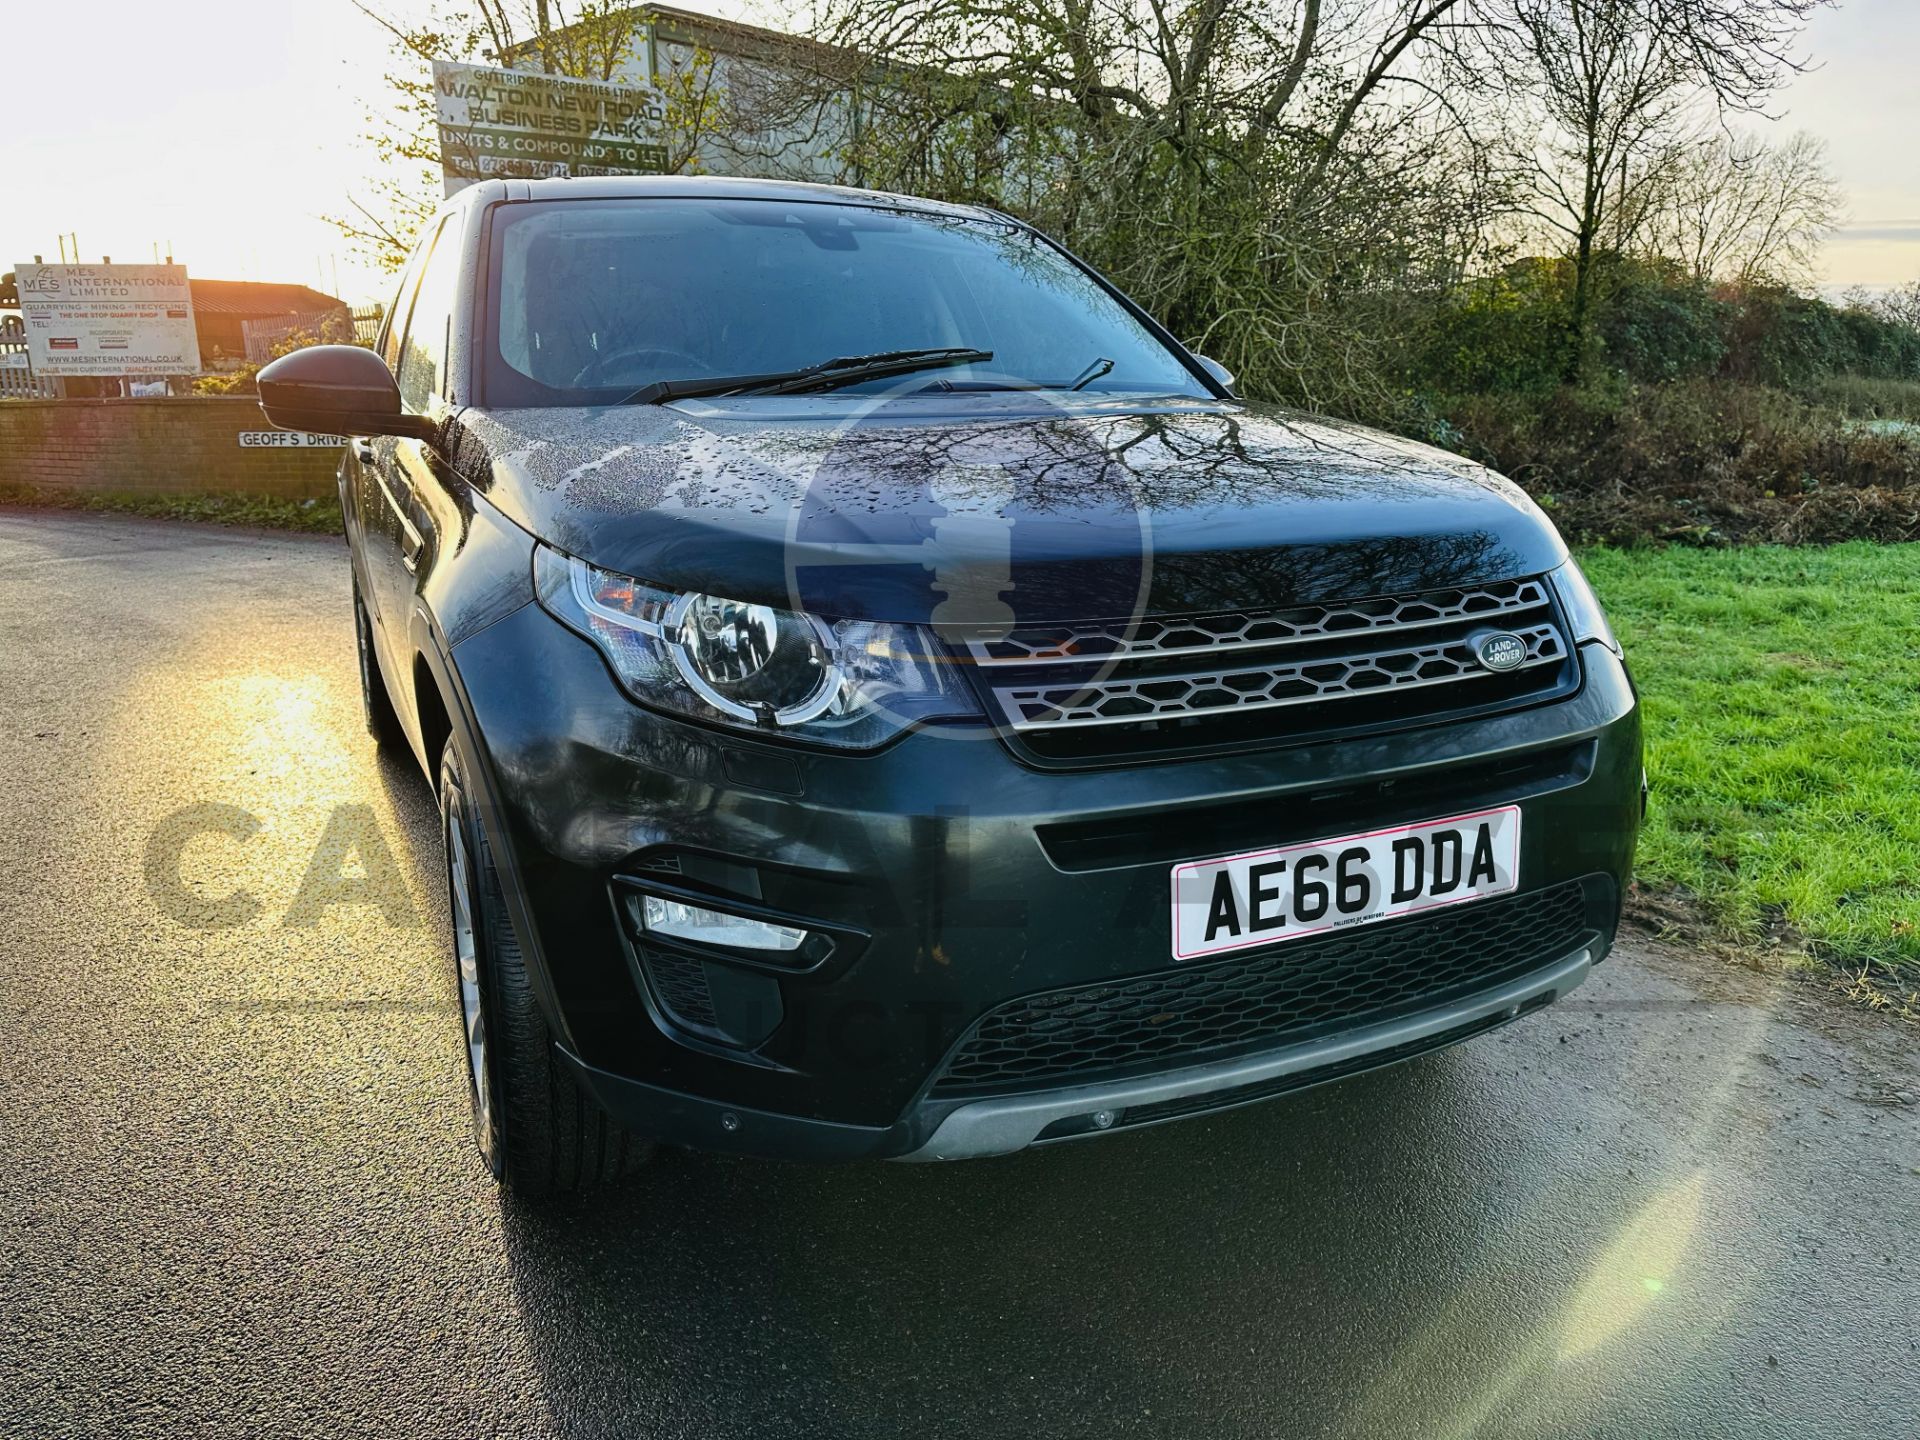 (On Sale) LAND ROVER DISCOVERY SPORT *SE EDITION* (2017 MODEL) - 7 SEATER - AIR CON - EURO 6 - Image 3 of 41